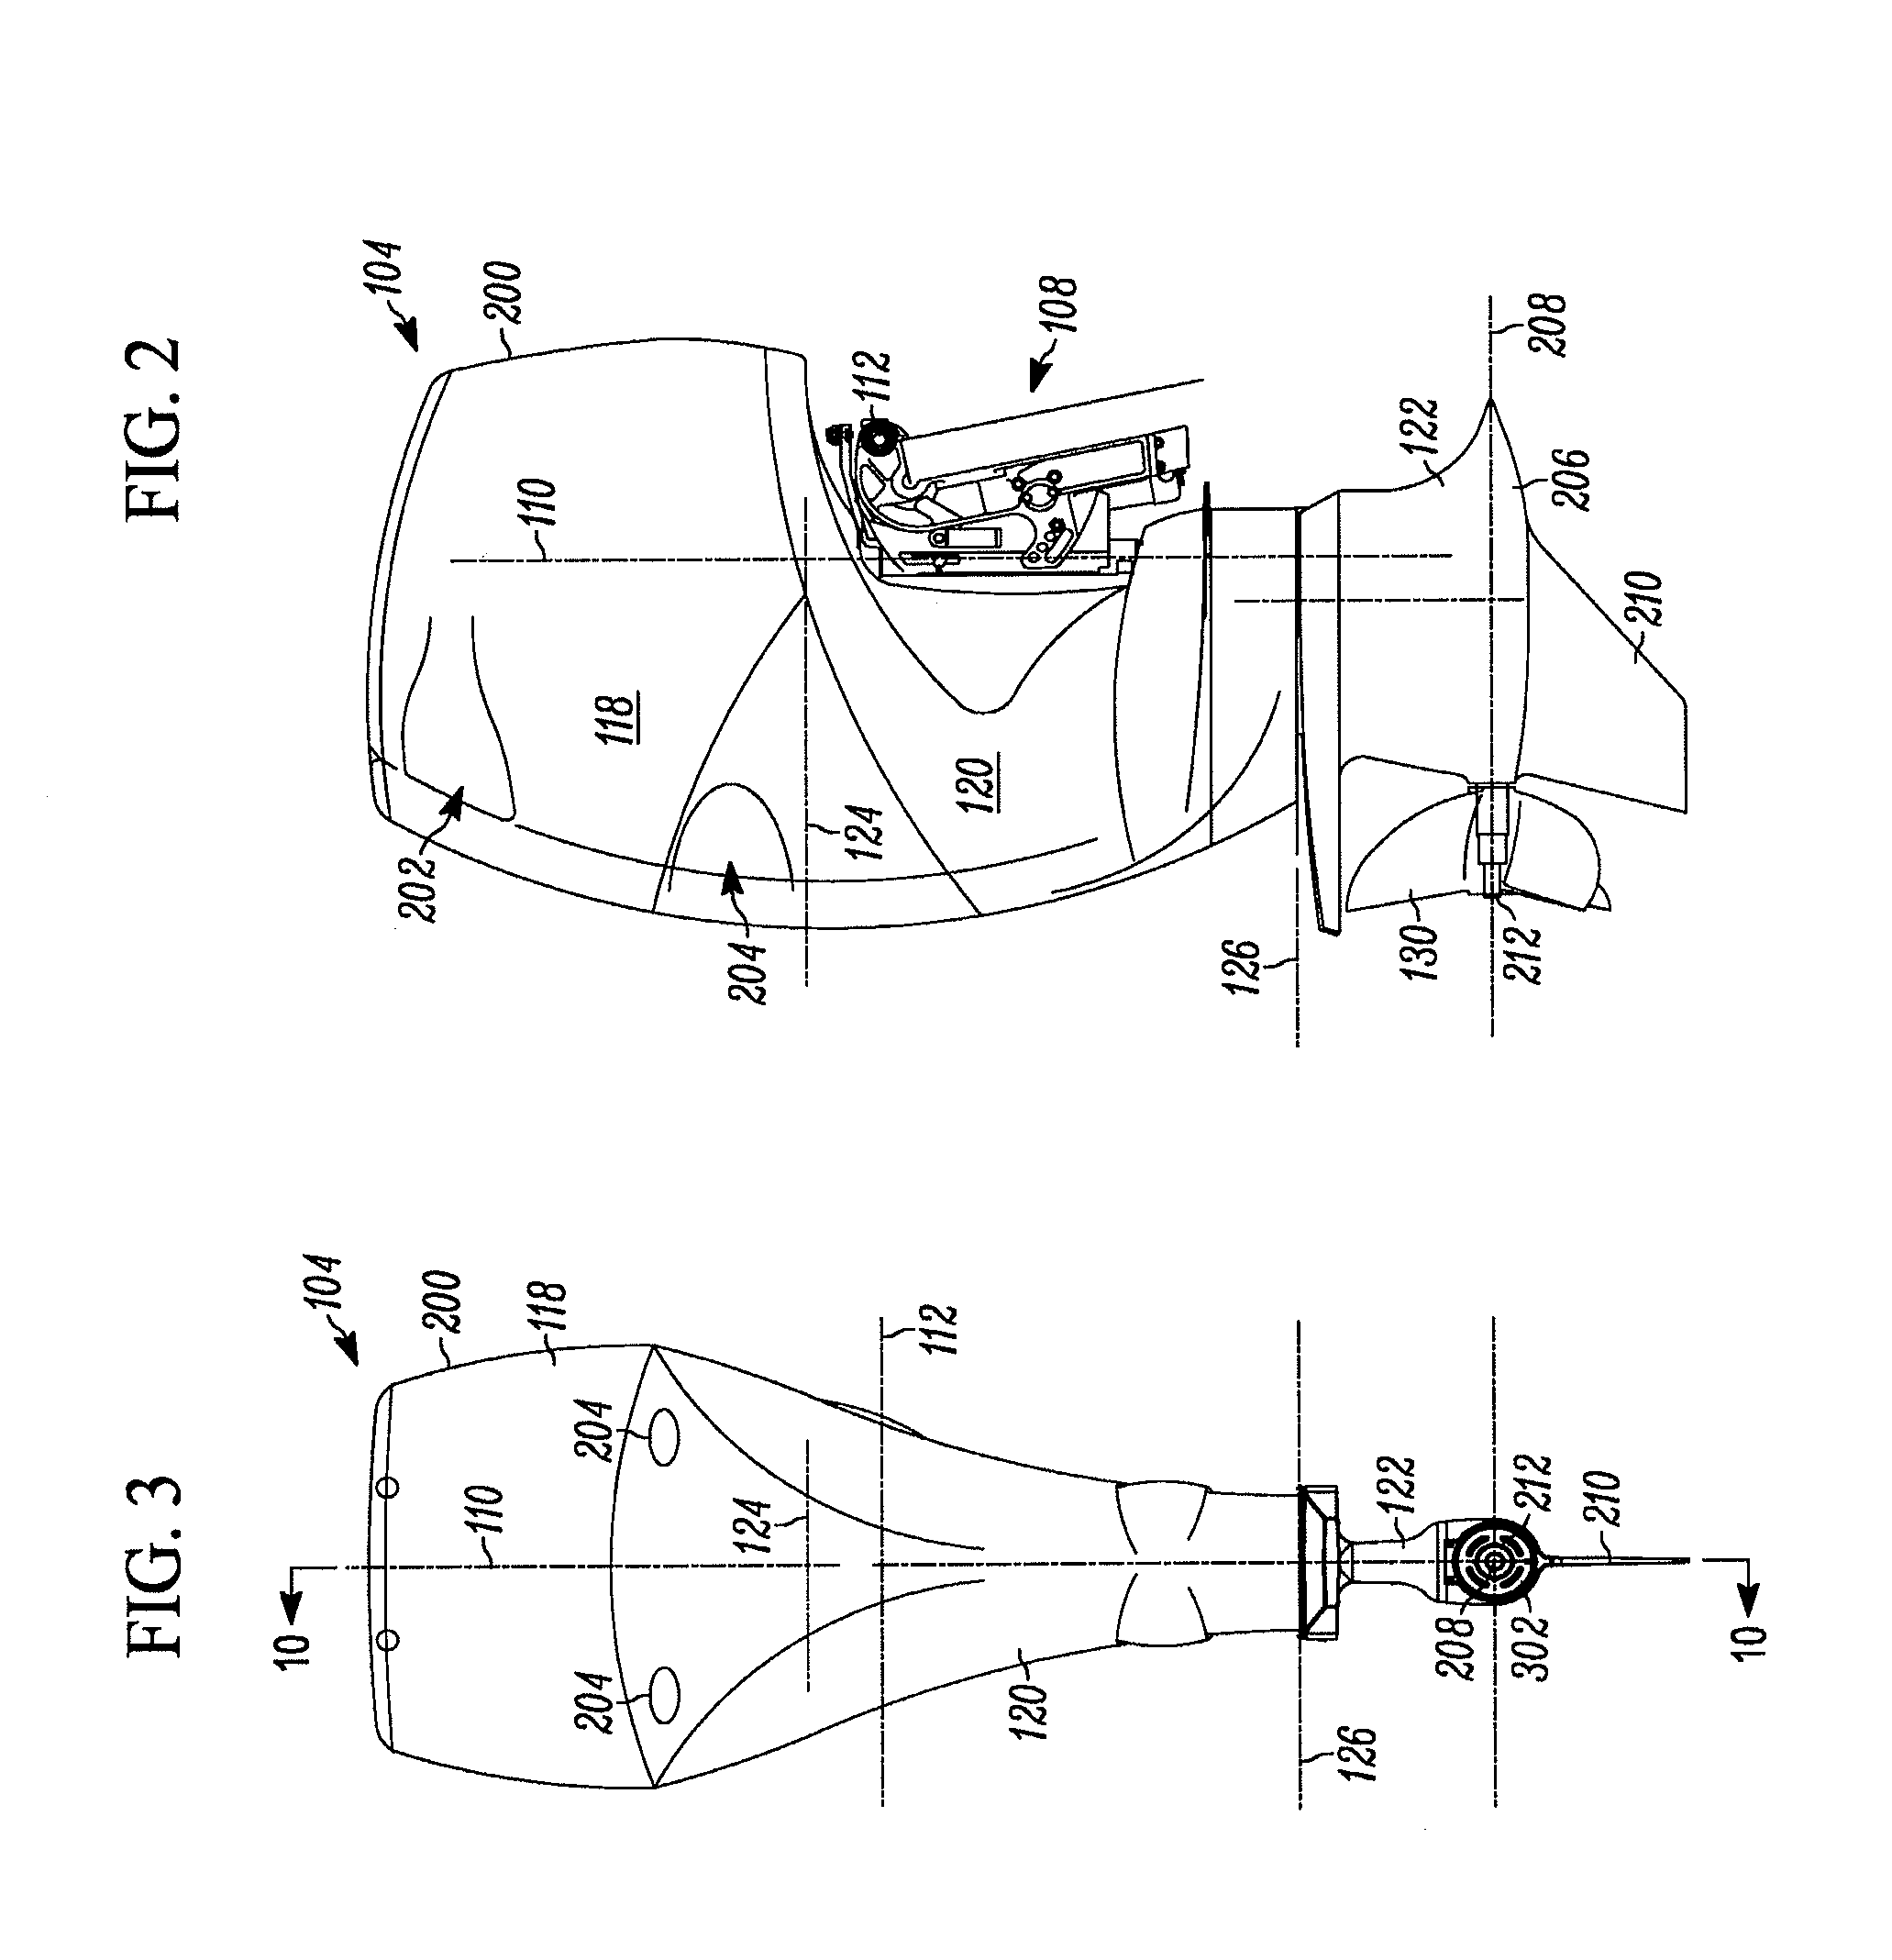 Large outboard motor for marine vessel application and related methods of making and operating same